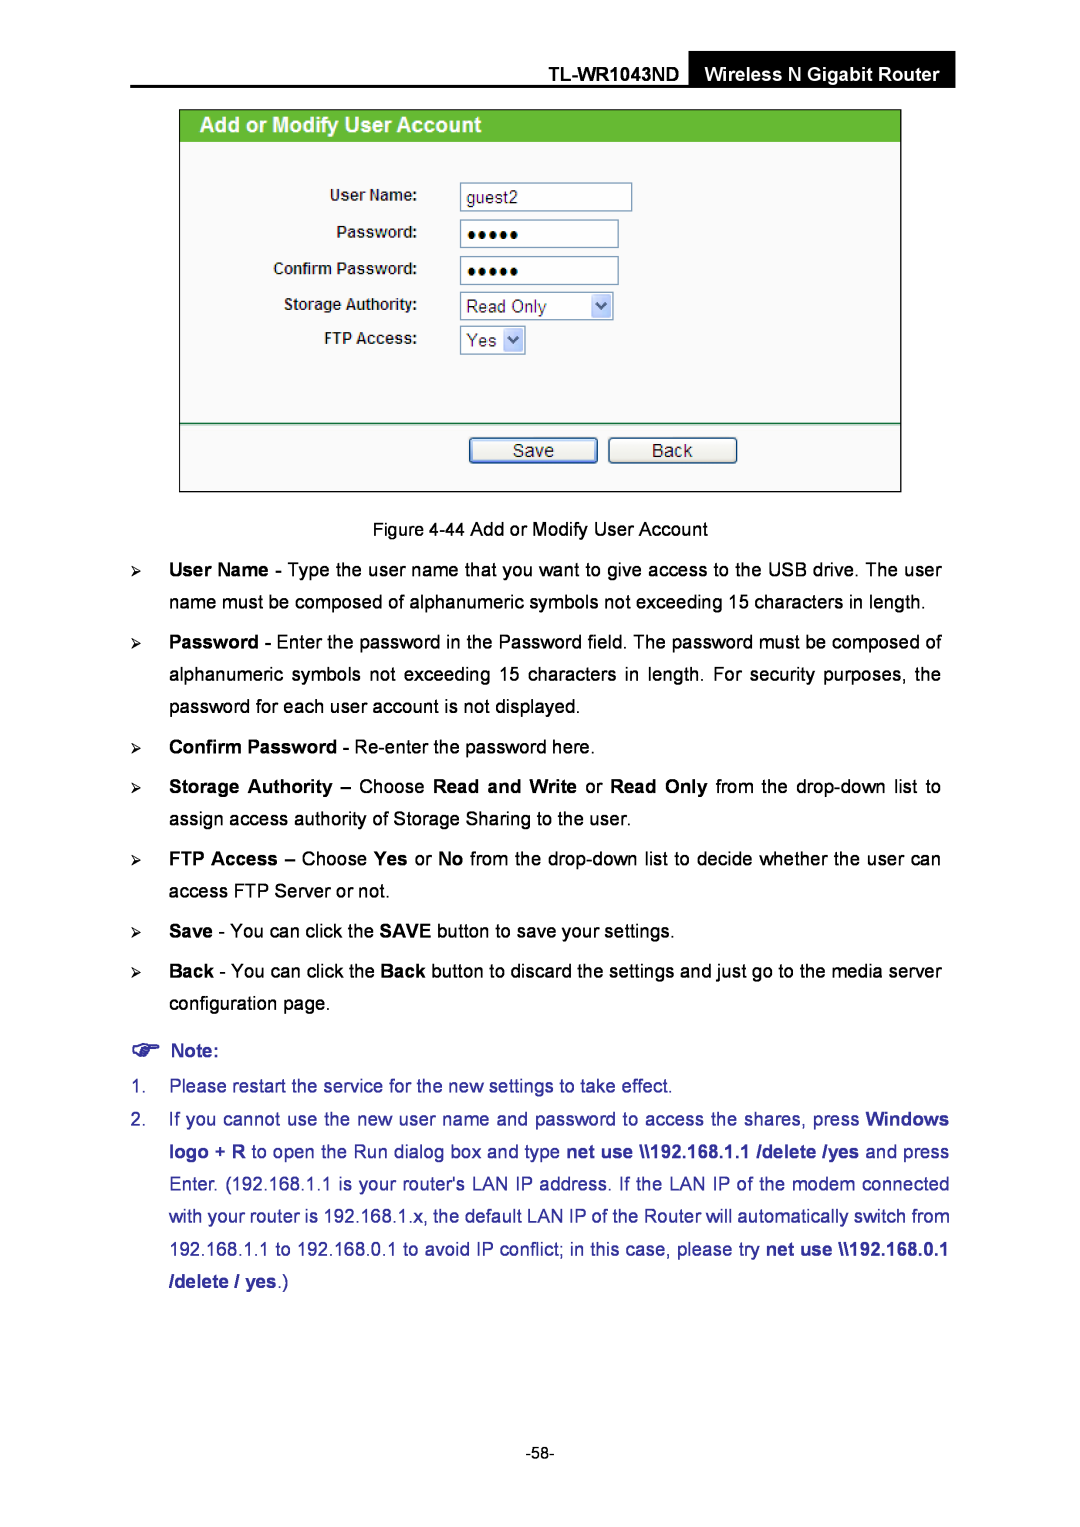 TP-Link manual Please restart the service for the new settings to take effect, TL-WR1043ND Wireless N Gigabit Router 